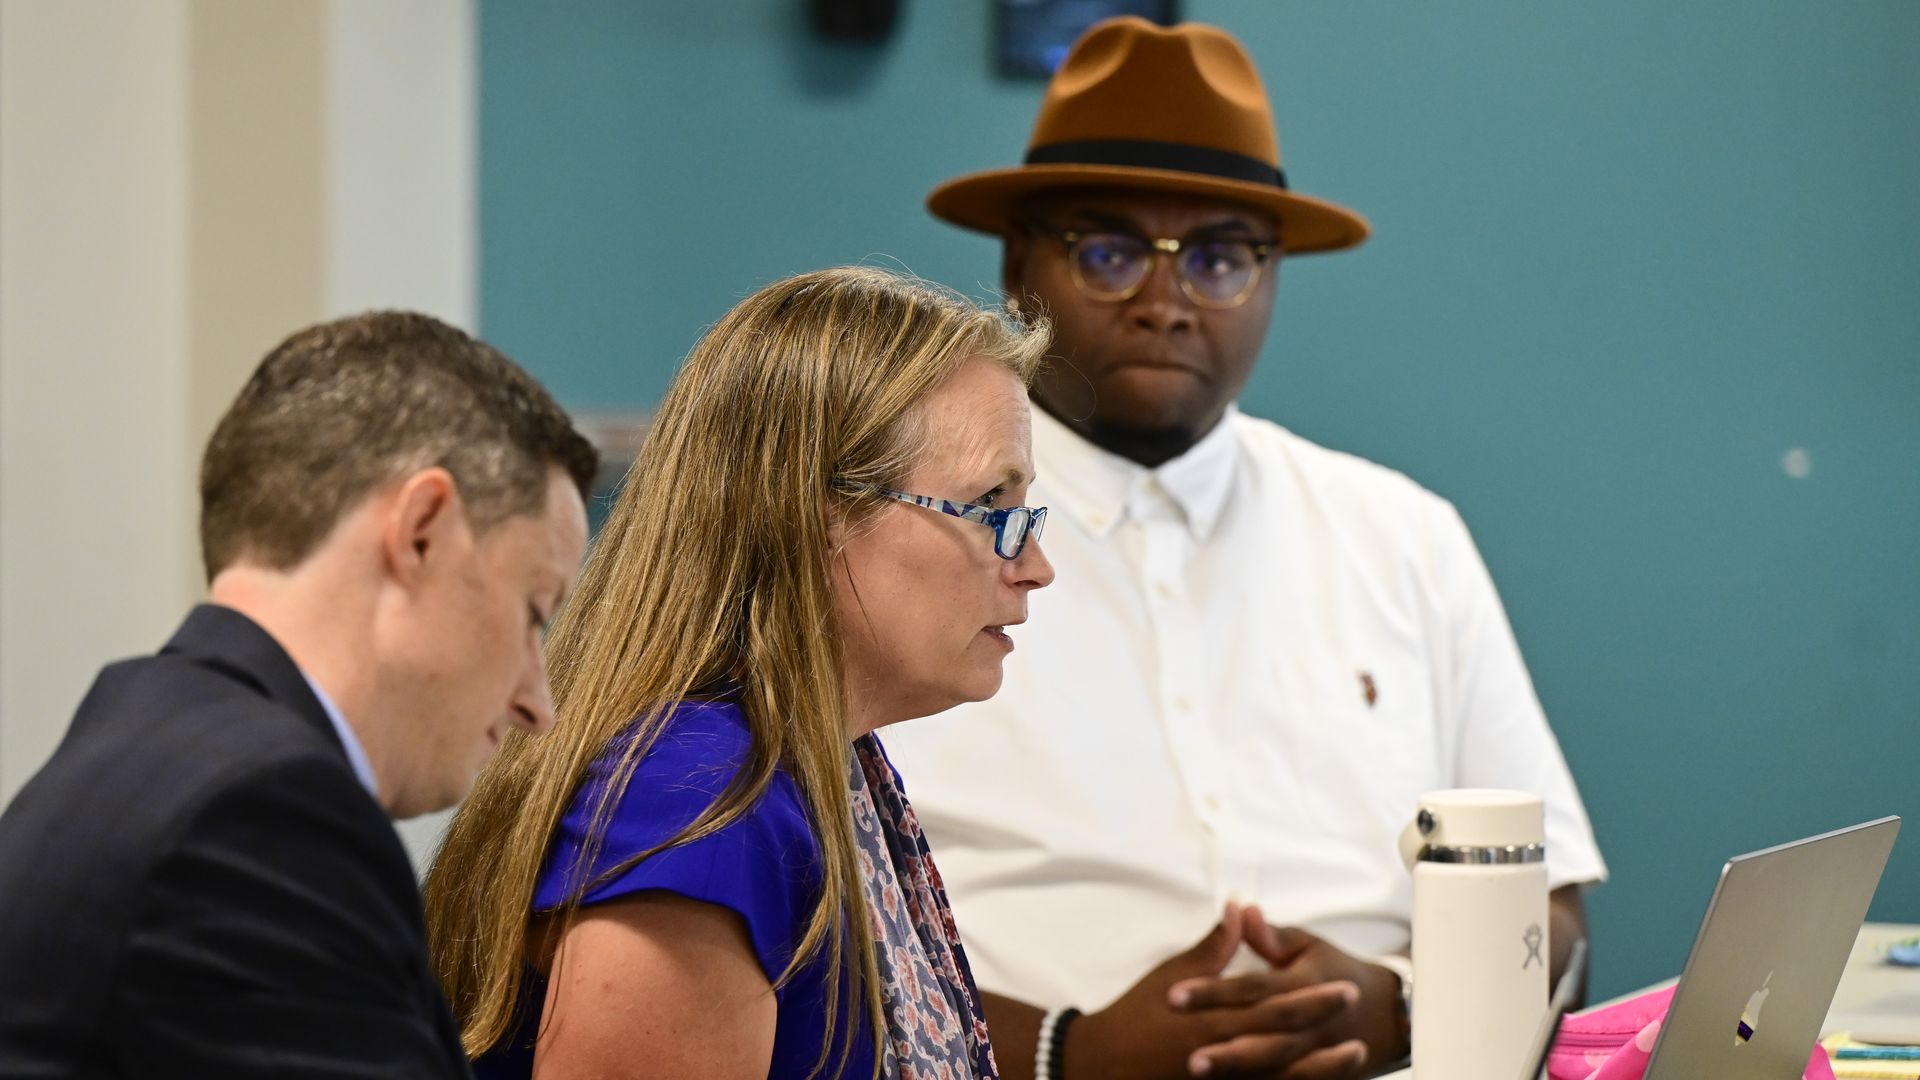 Denver school board president Carrie Olson, center, during a meeting in August. Photo: Andy Cross/Denver Post via Getty Images